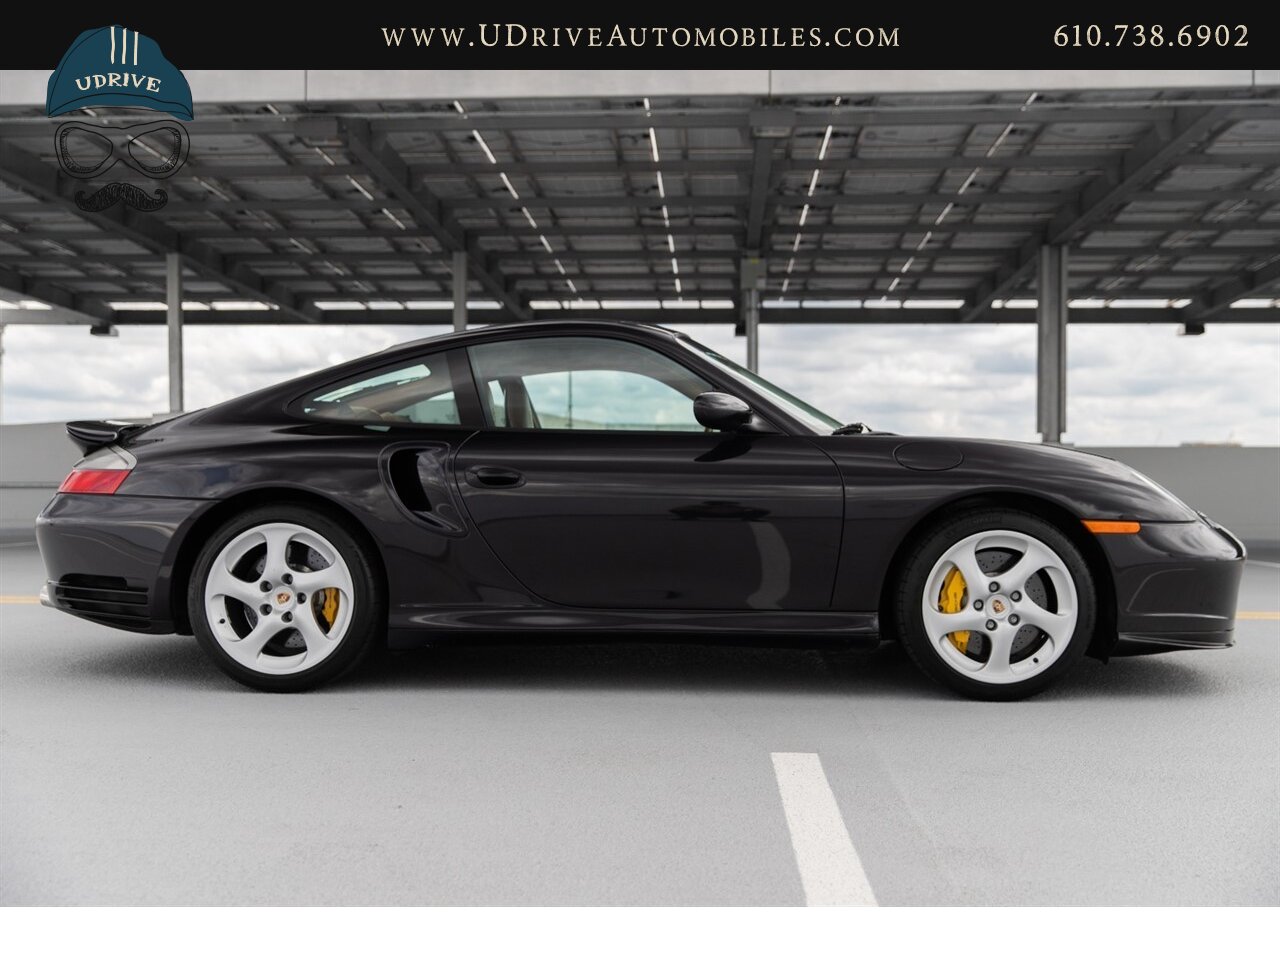 2005 Porsche 911 Turbo S 6 Speed 14k Miles Sport Sts Painted Backs  Natural Brown Lthr $144,070 MSRP - Photo 16 - West Chester, PA 19382